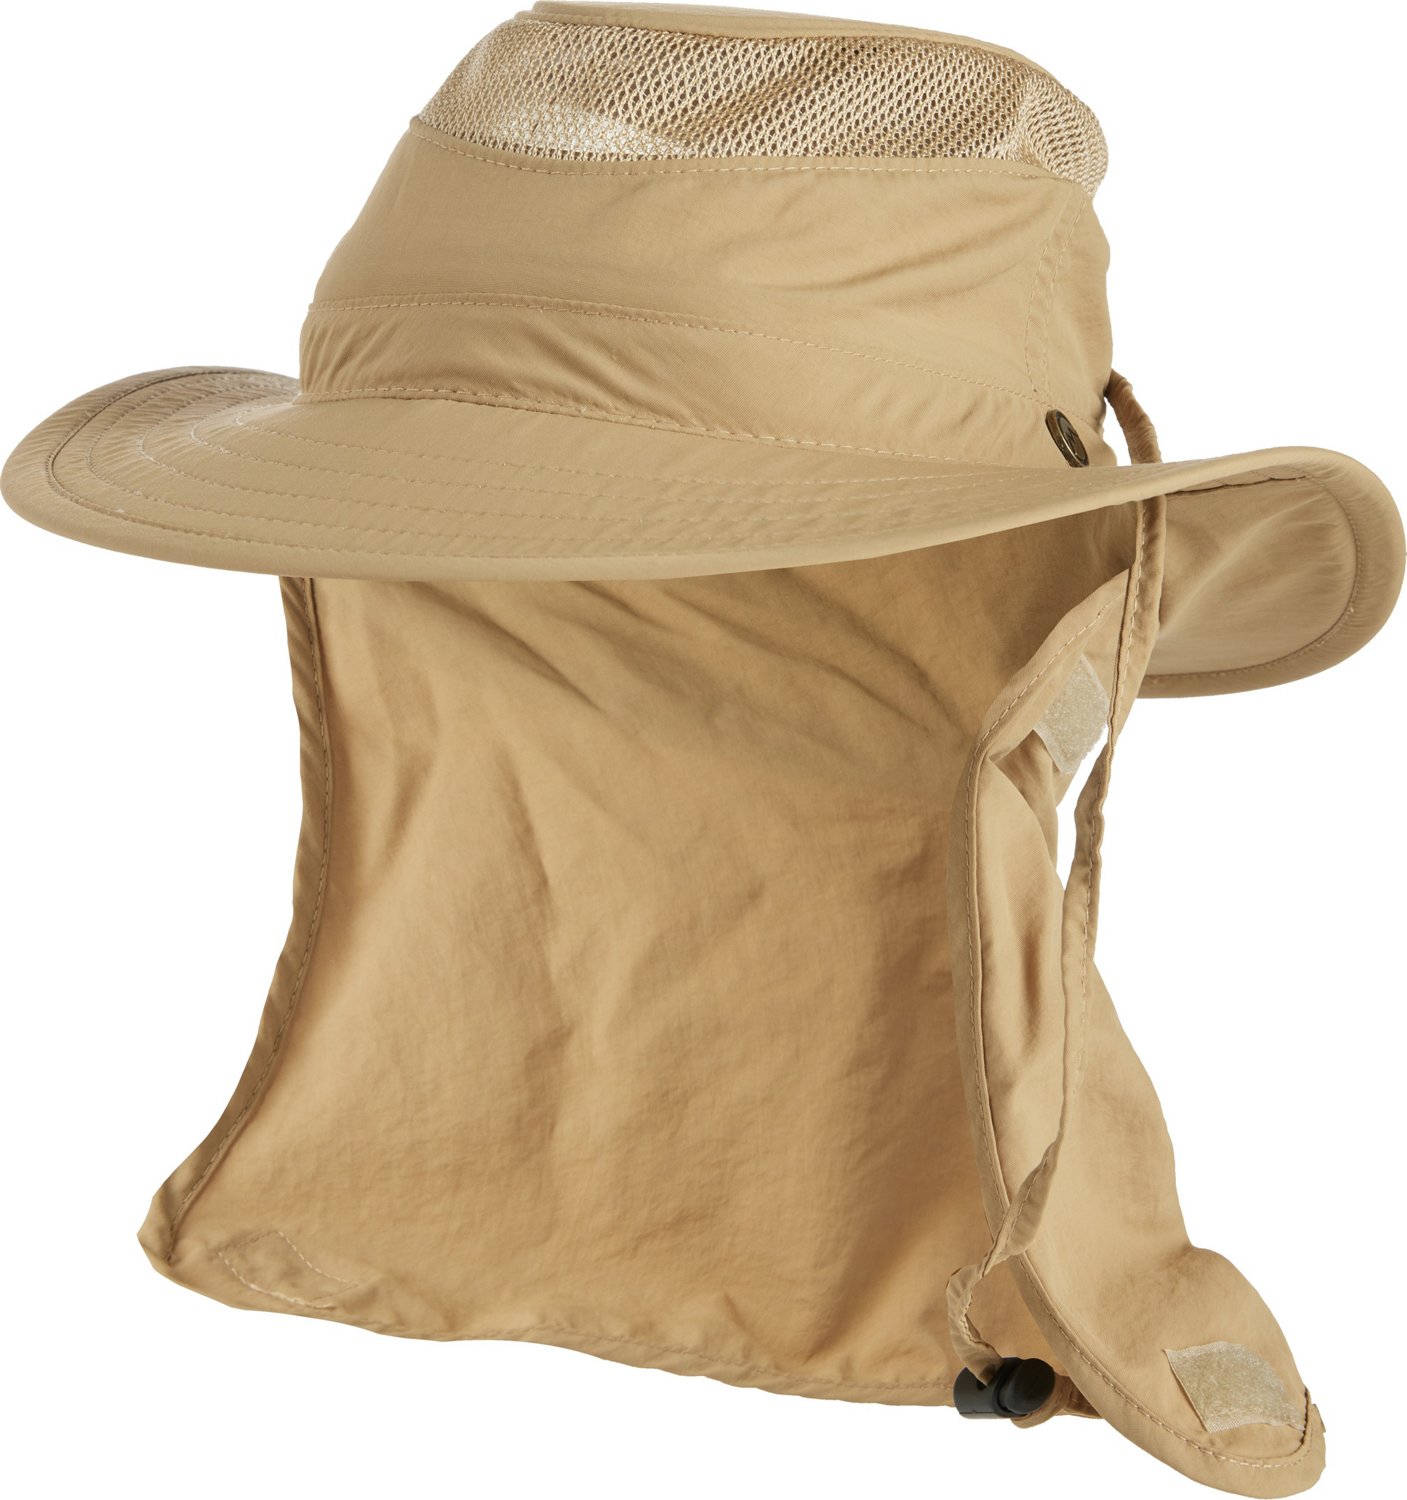 Academy Sports + Outdoors Magellan Outdoors Men's Boating Boonie Hat with  Shield